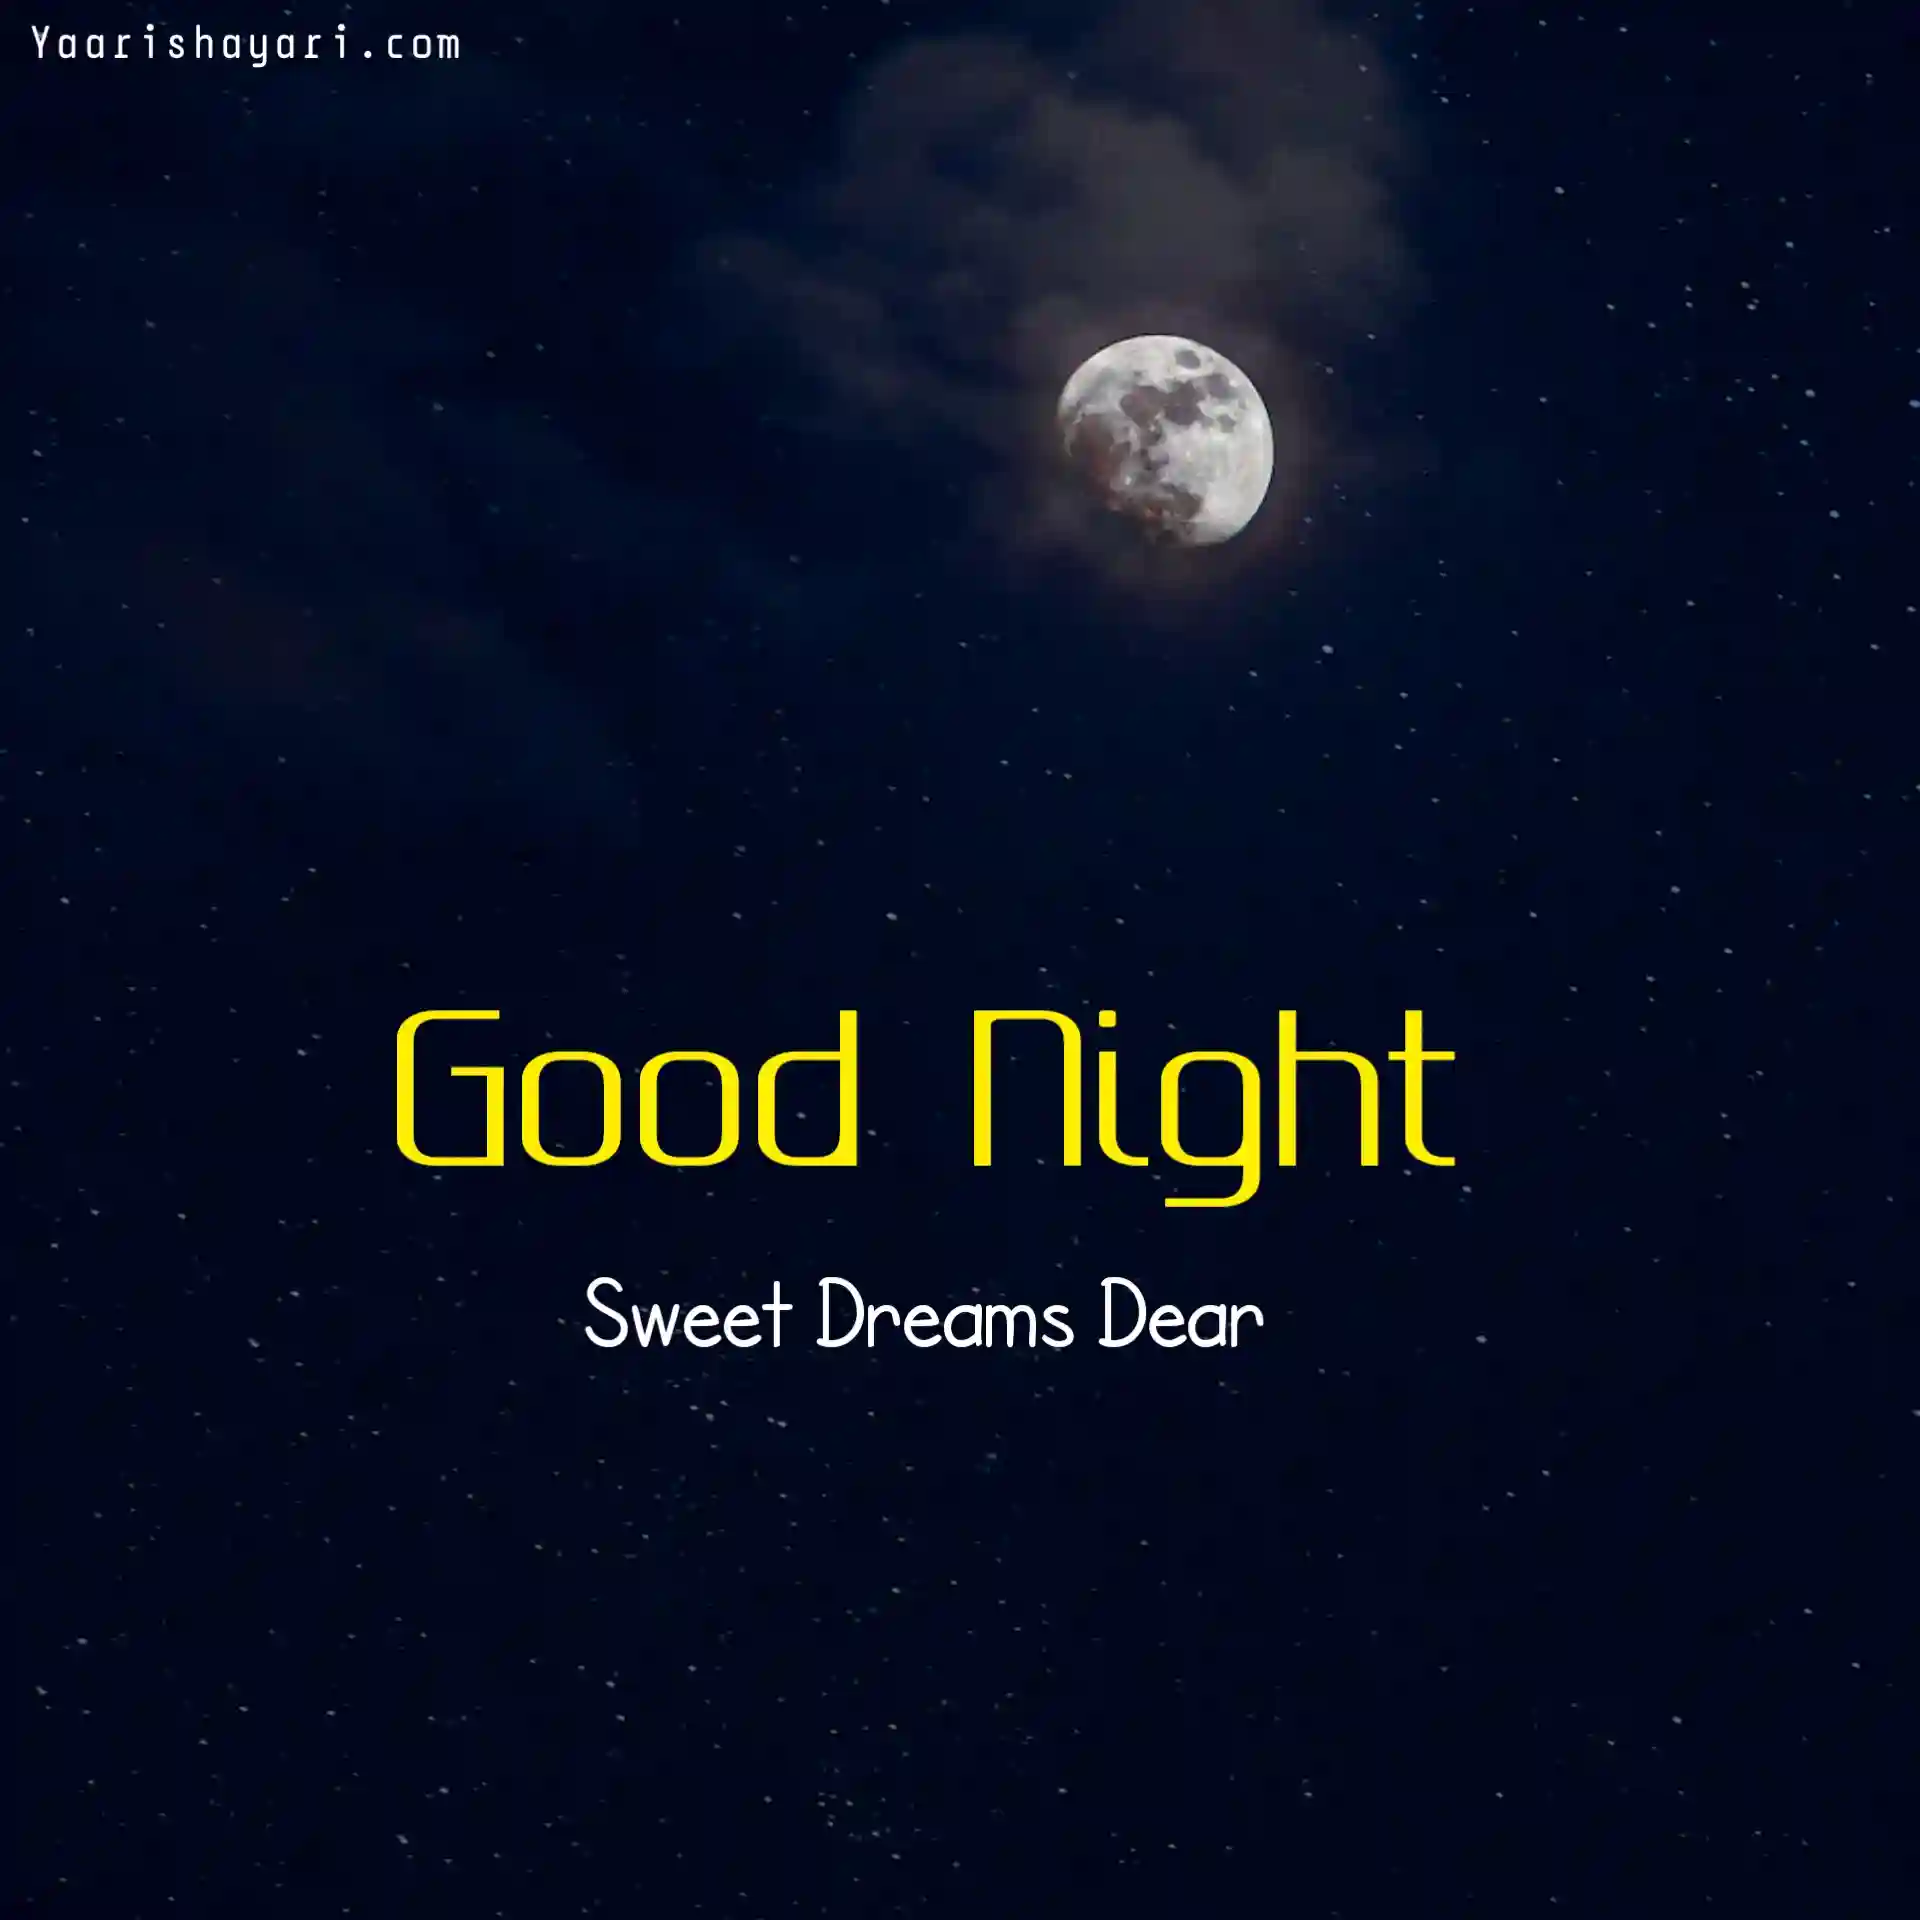 80+ Beautiful Good Night Images, Pictures & HD Photos